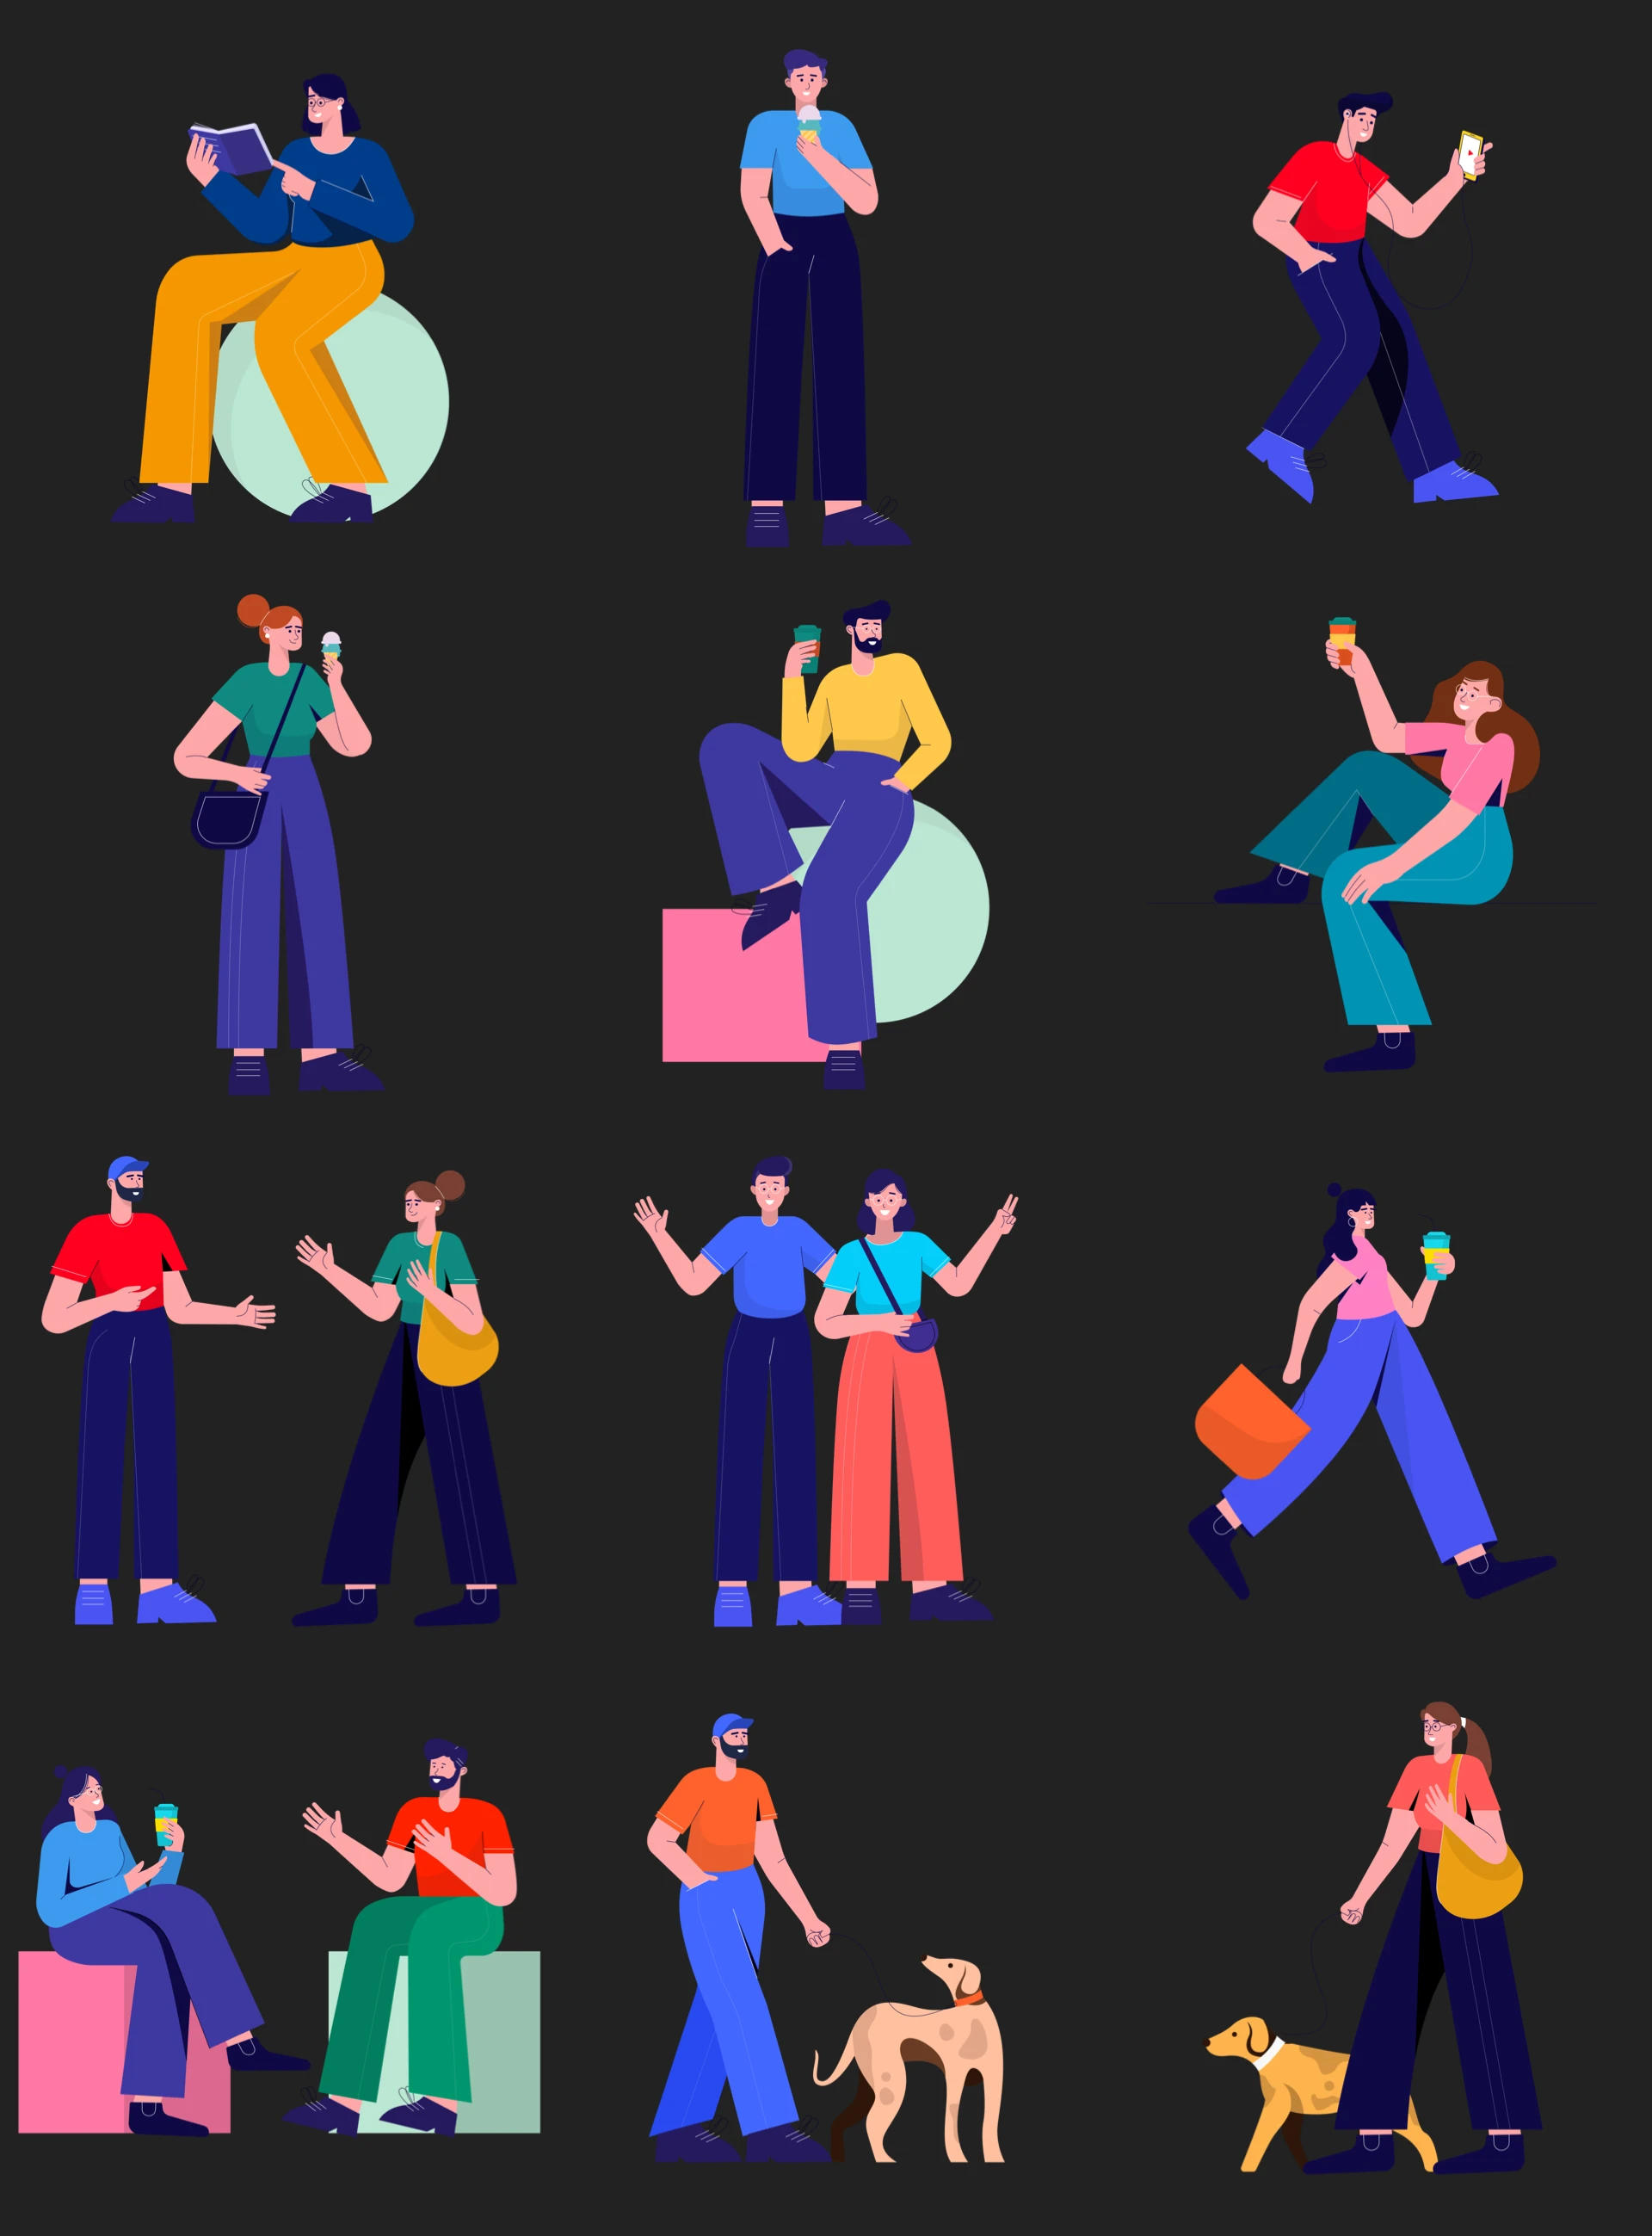 Lifestyle Free Illustrations - 12 colorful vector illustrations about lifestyle. Saving you time as a designer and money as a startup owner or an entrepreneur.